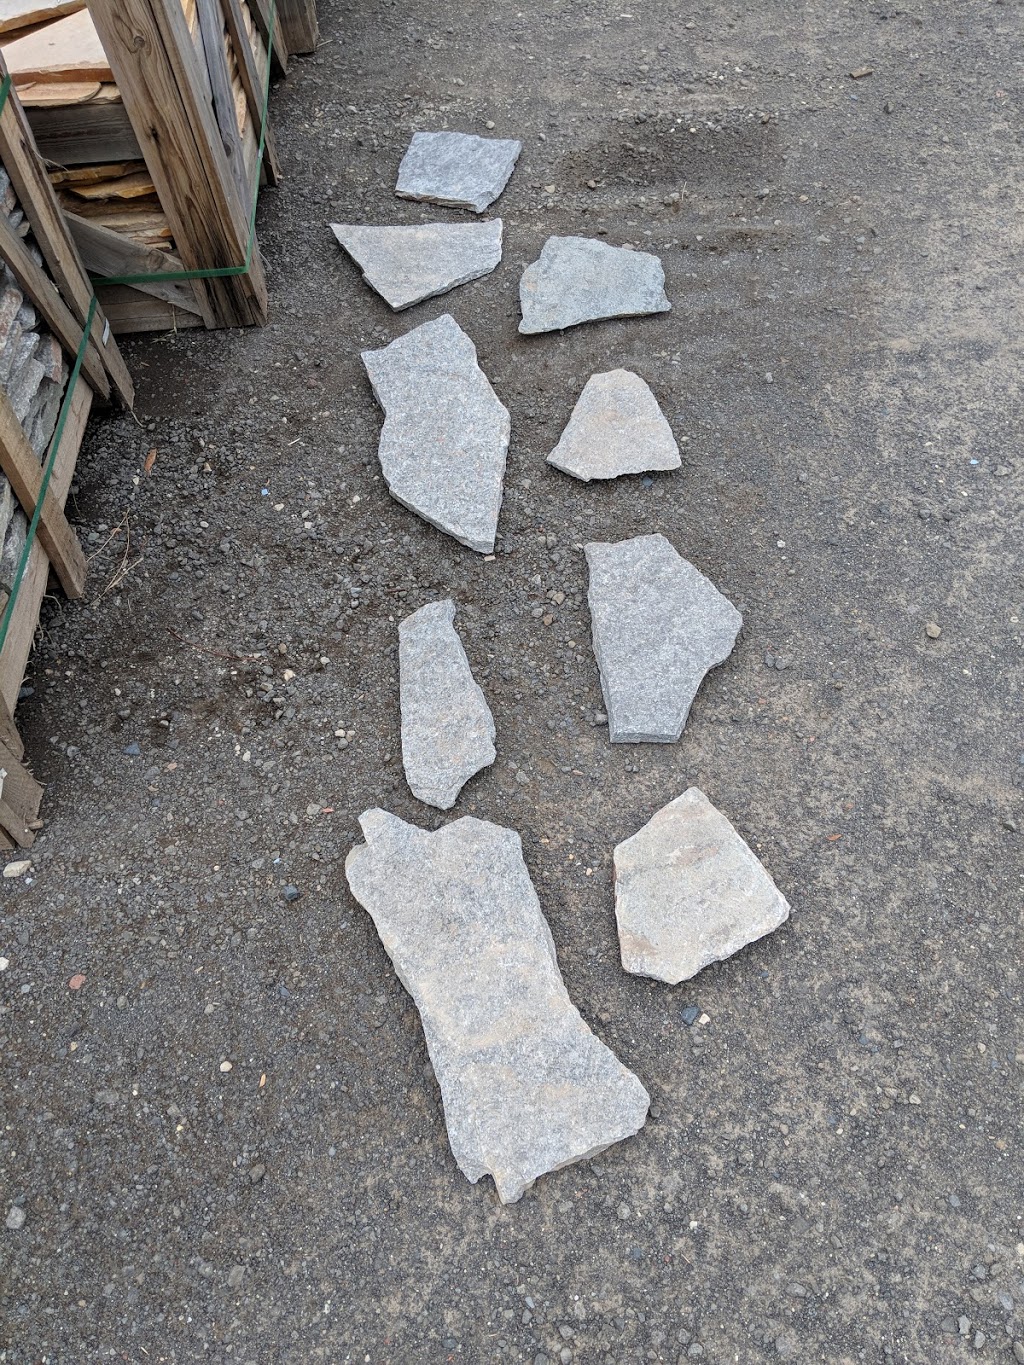 RMS Traders - Natural Stone Tiles and Pavers | home goods store | 6 Nevada Ct, Hoppers Crossing VIC 3029, Australia | 0397487788 OR +61 3 9748 7788